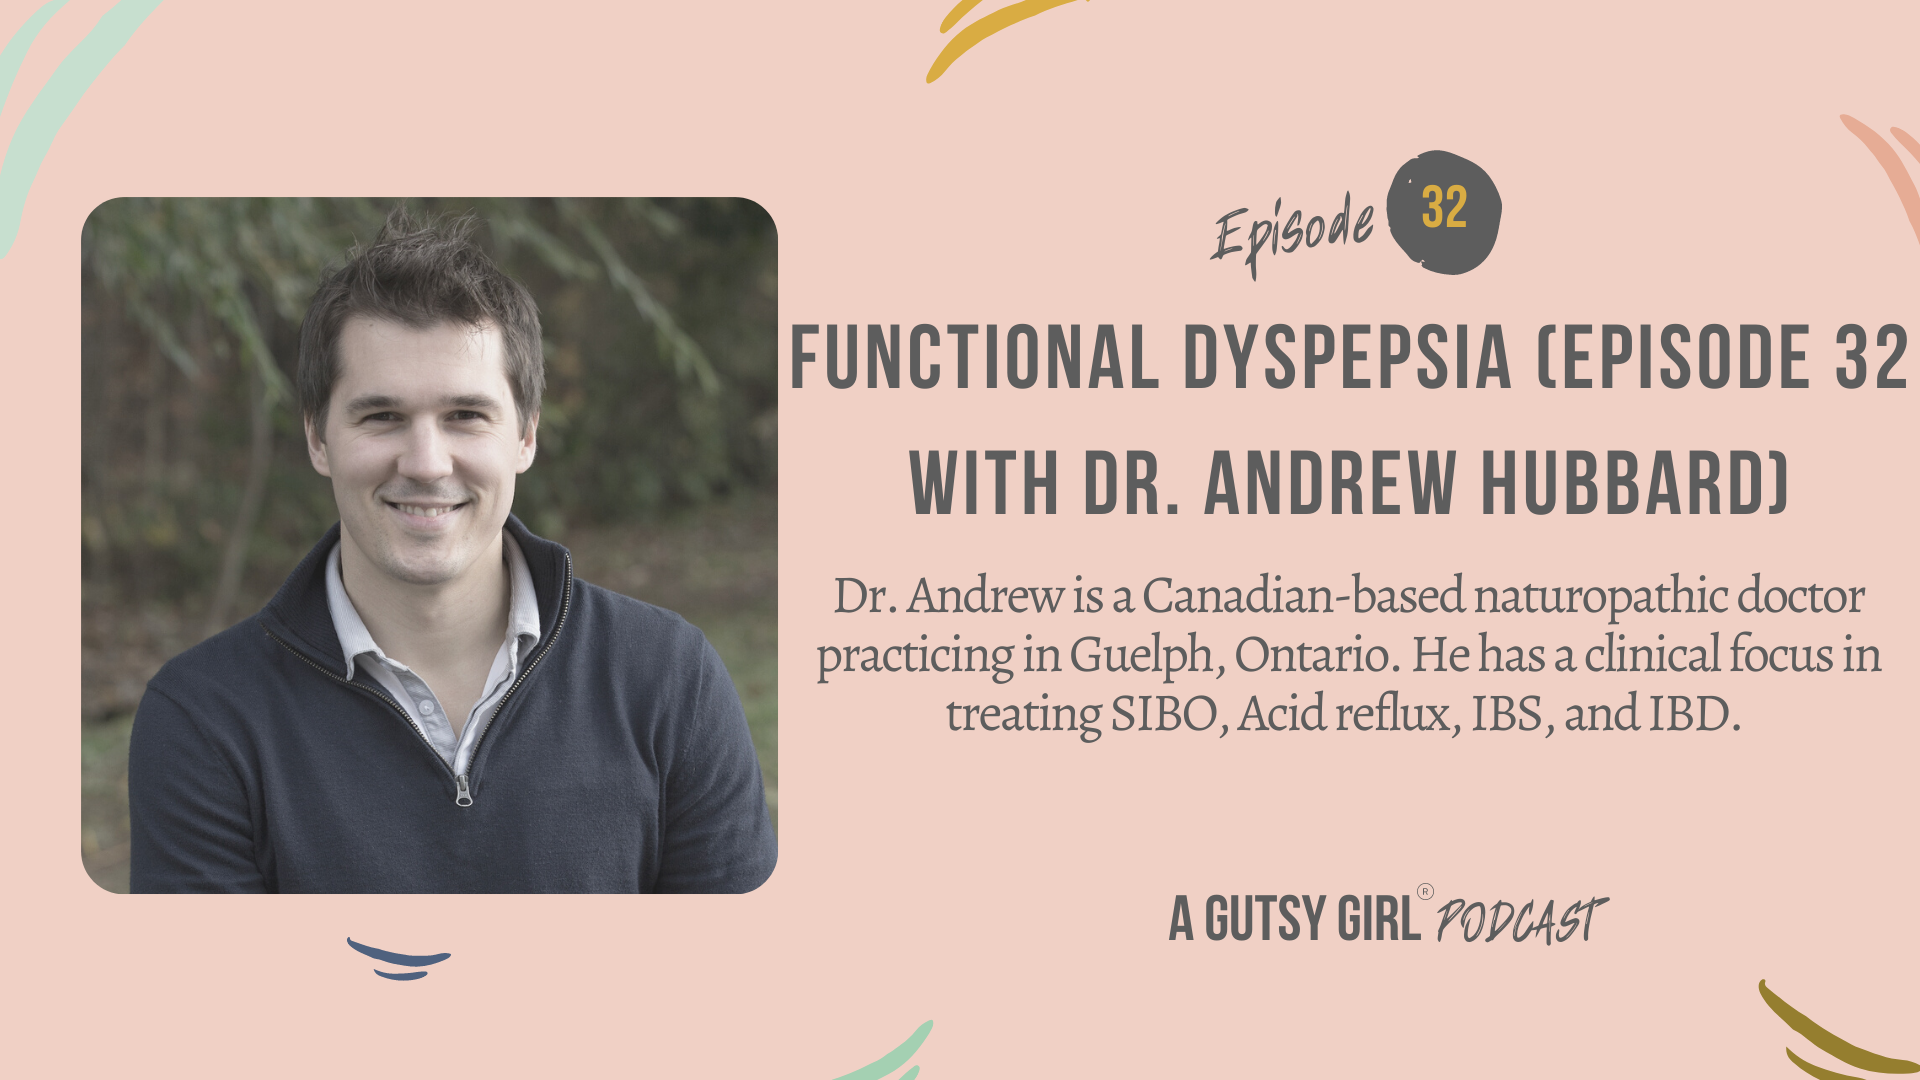 Functional Dyspepsia (Episode 32 with Dr. Andrew Hubbard)